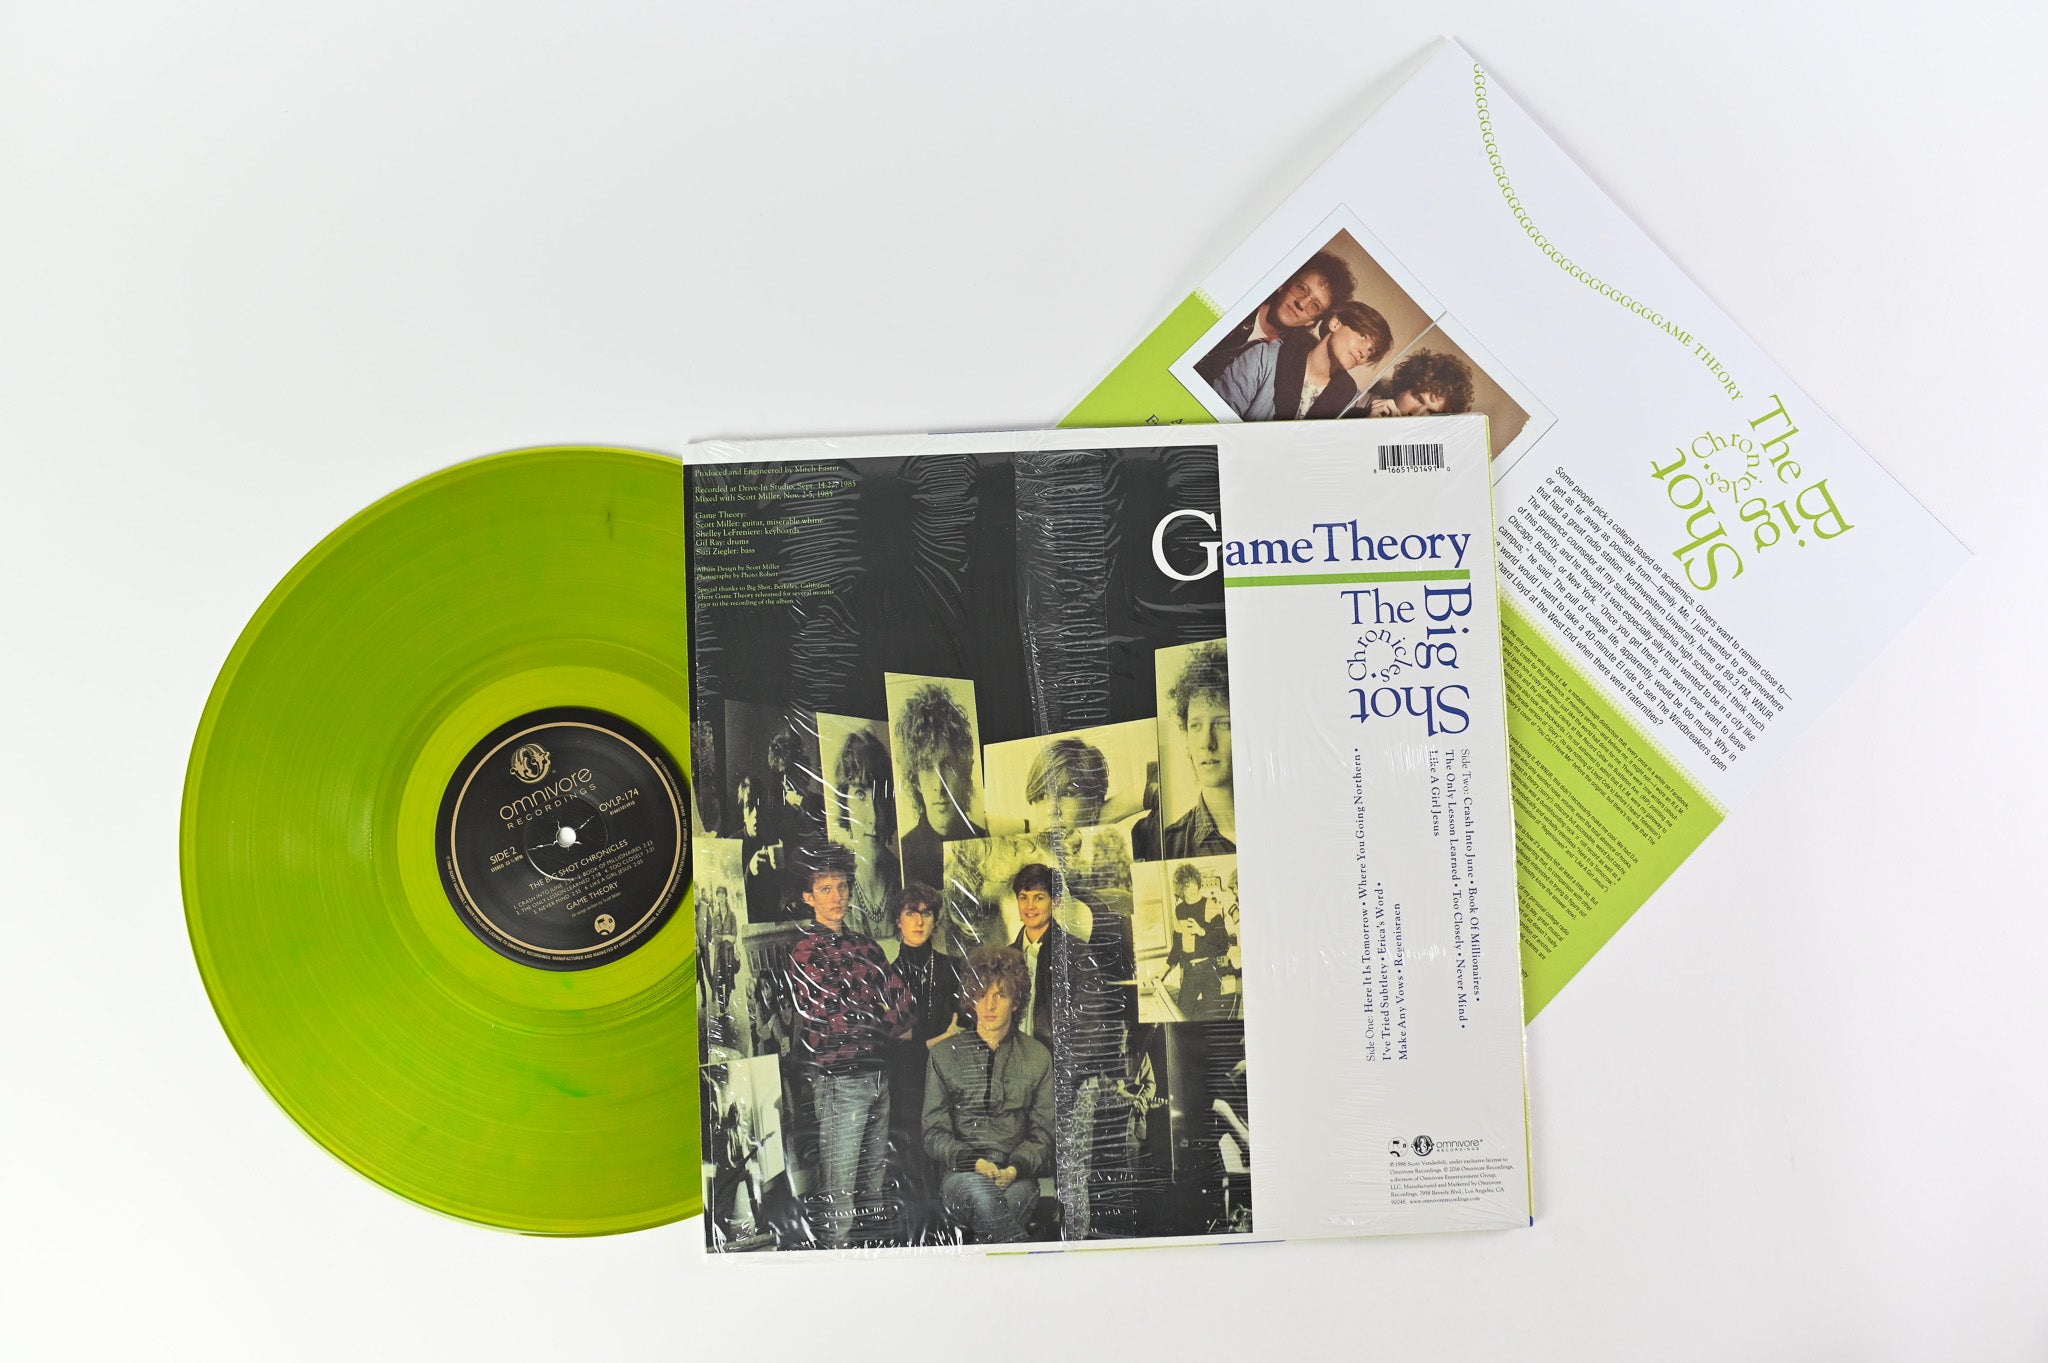 Game Theory - The Big Shot Chronicles on Omnivore Recordings - Lime Green Vinyl